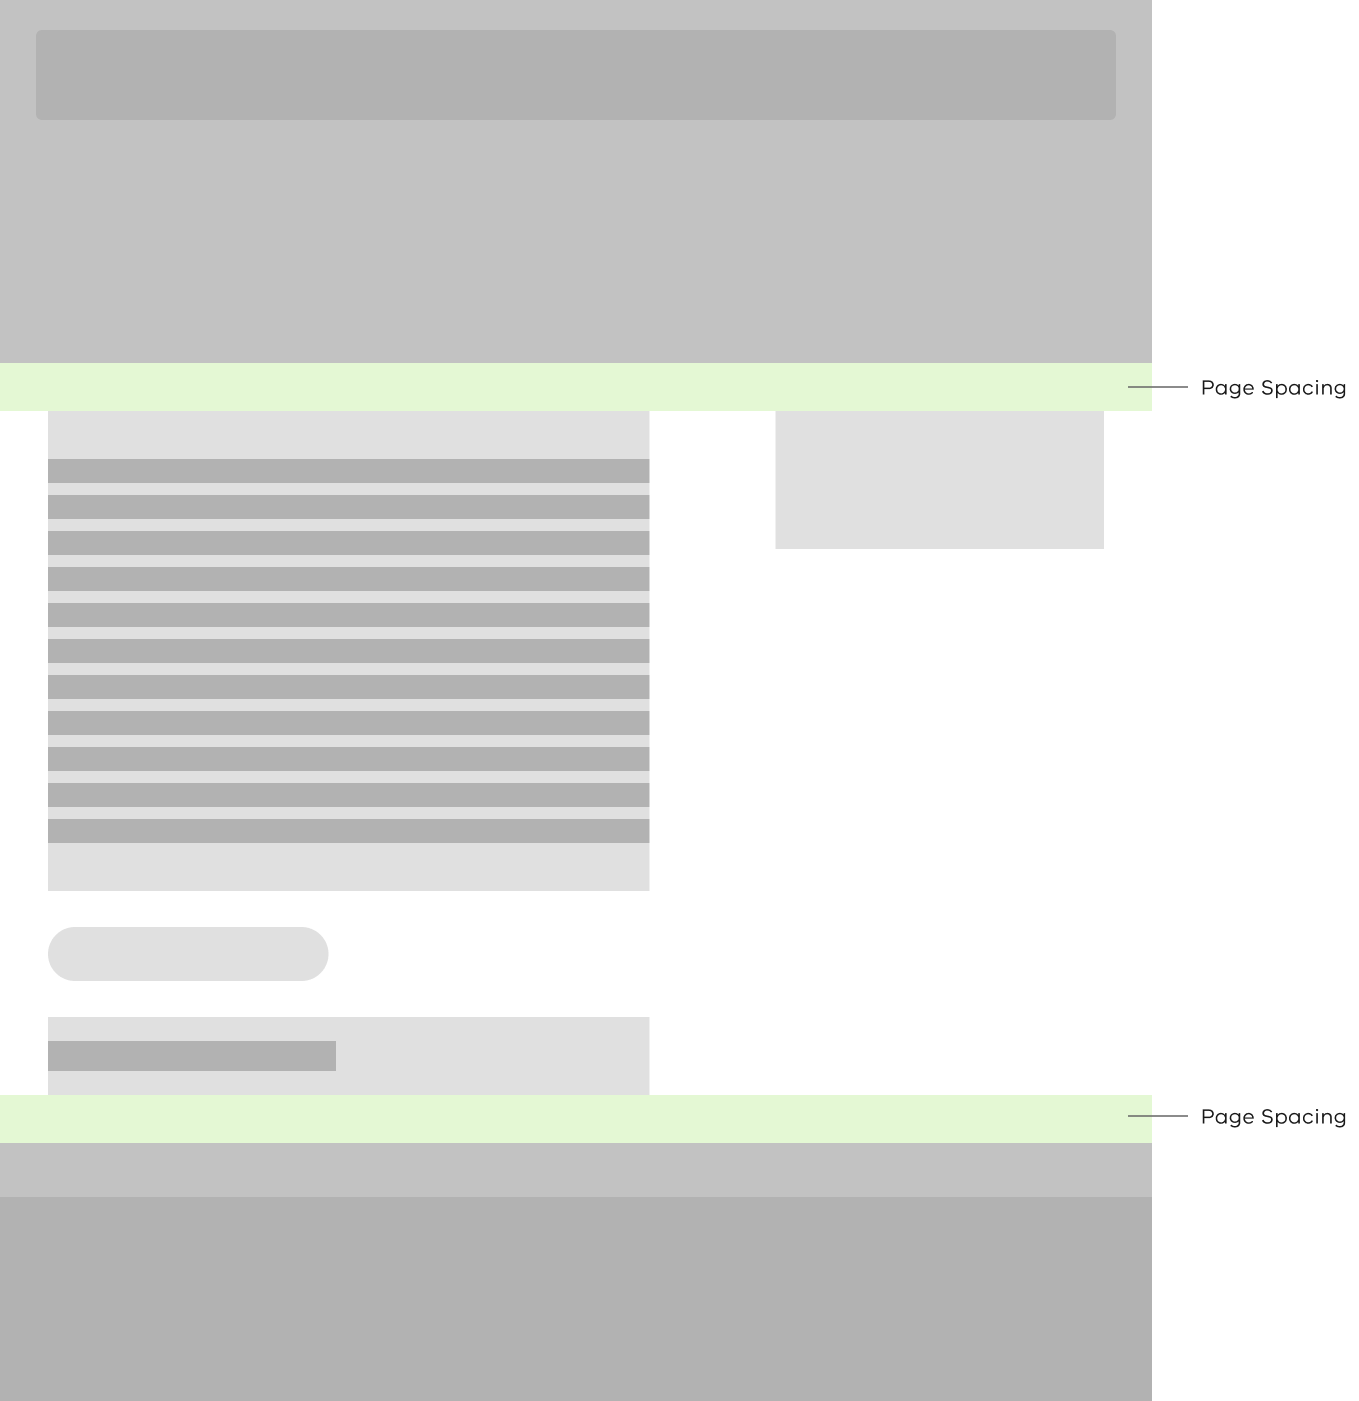 Sample visual of page section layout spacing